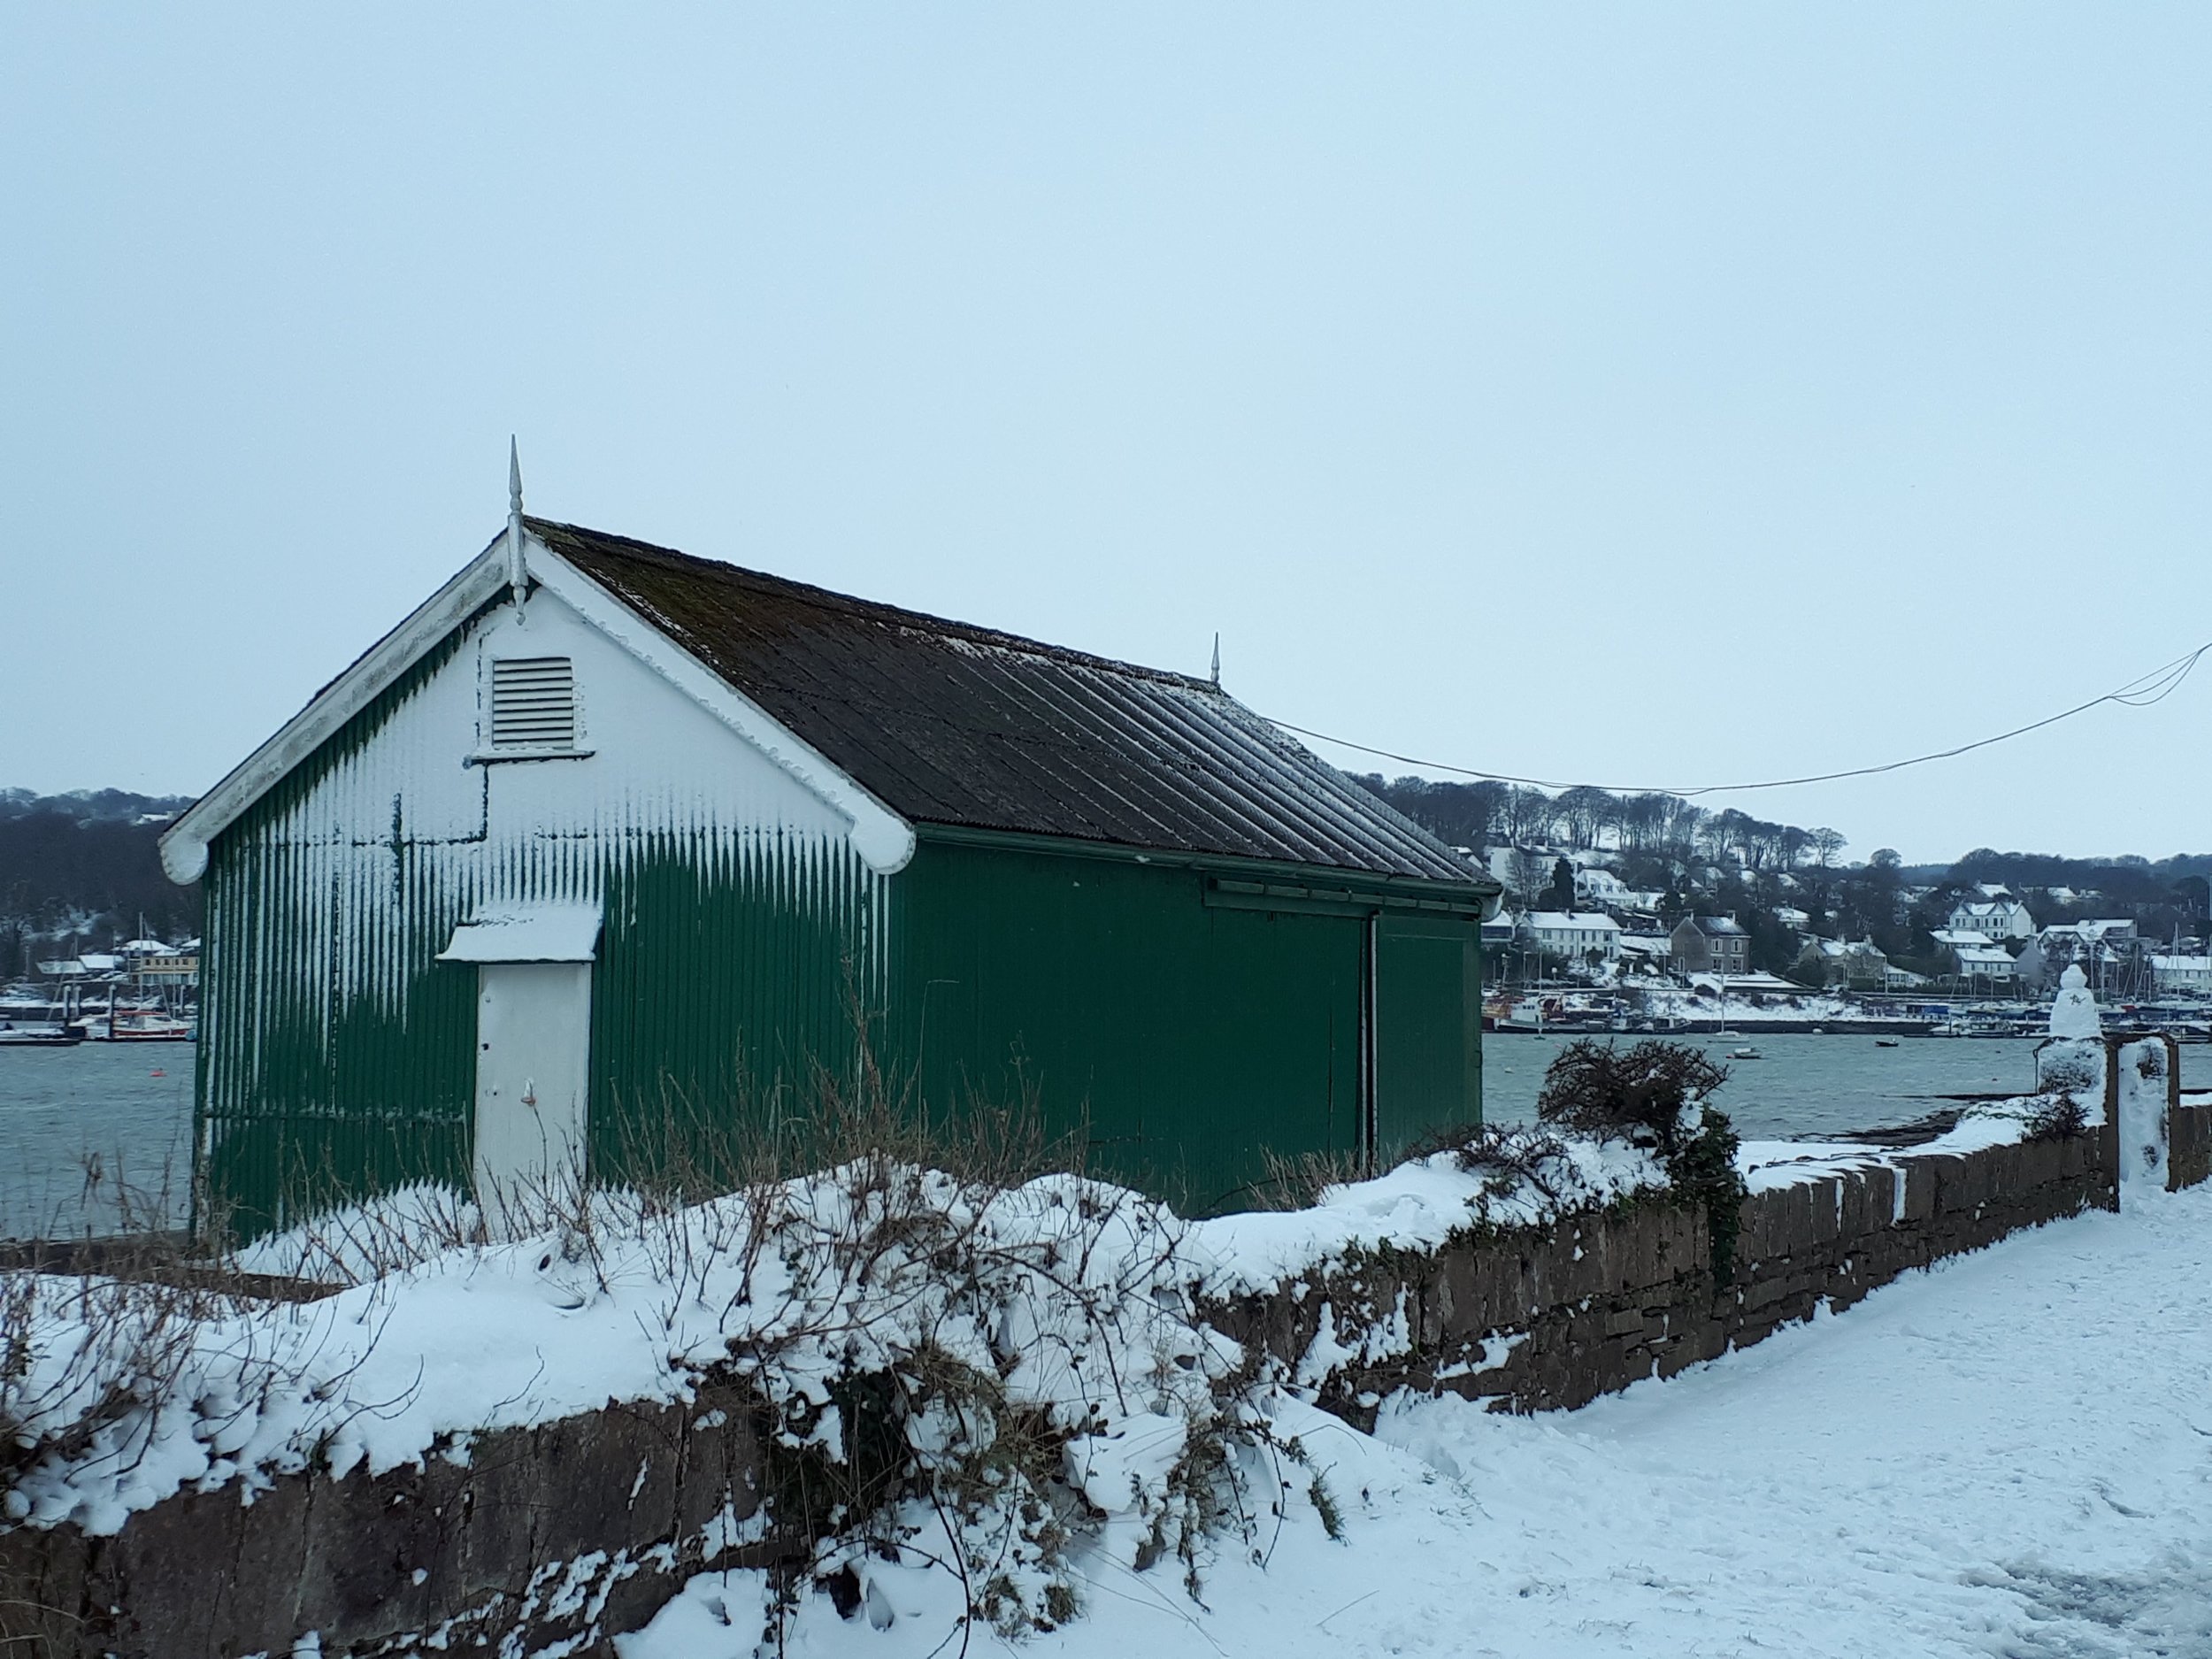 Winter at the Old Boathouse, Currabinny